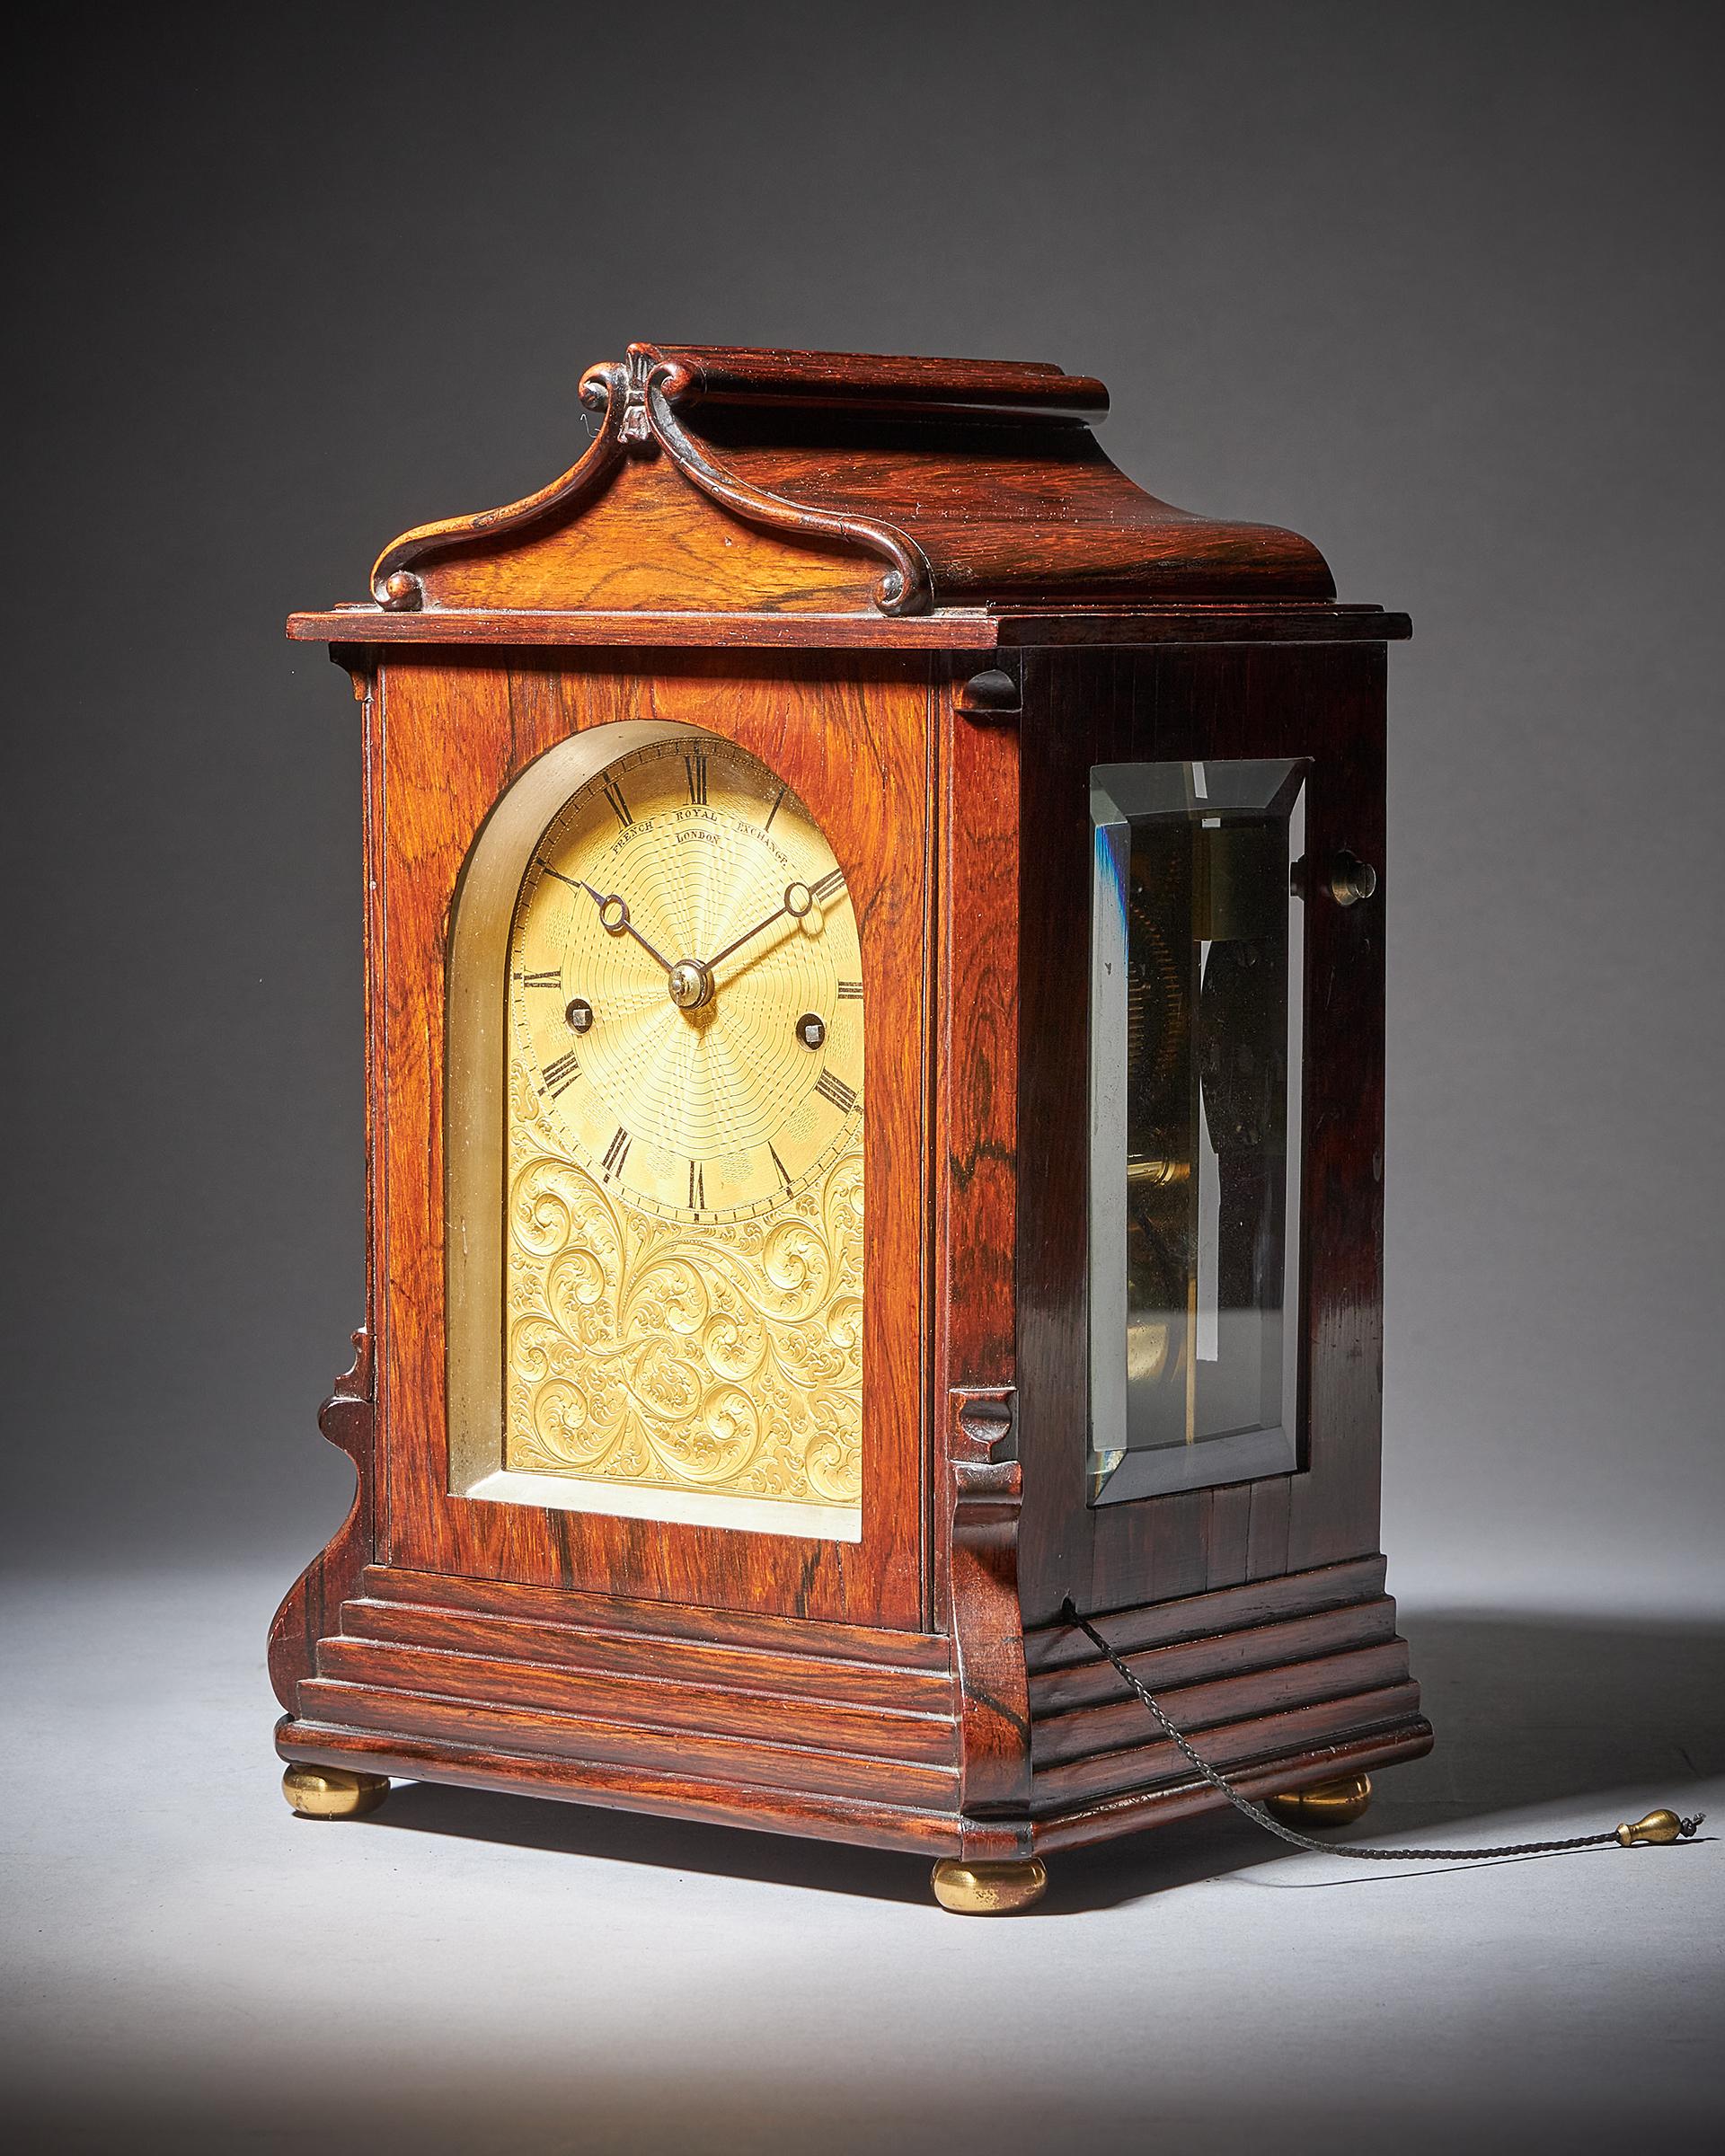 This lovely small library clock has a spring-driven eight-day twin chain-fusee movement with going and striking trains. The going train has anchor escapement with a short pendulum and stirrup regulation to facilitate adjusting the timing, which is